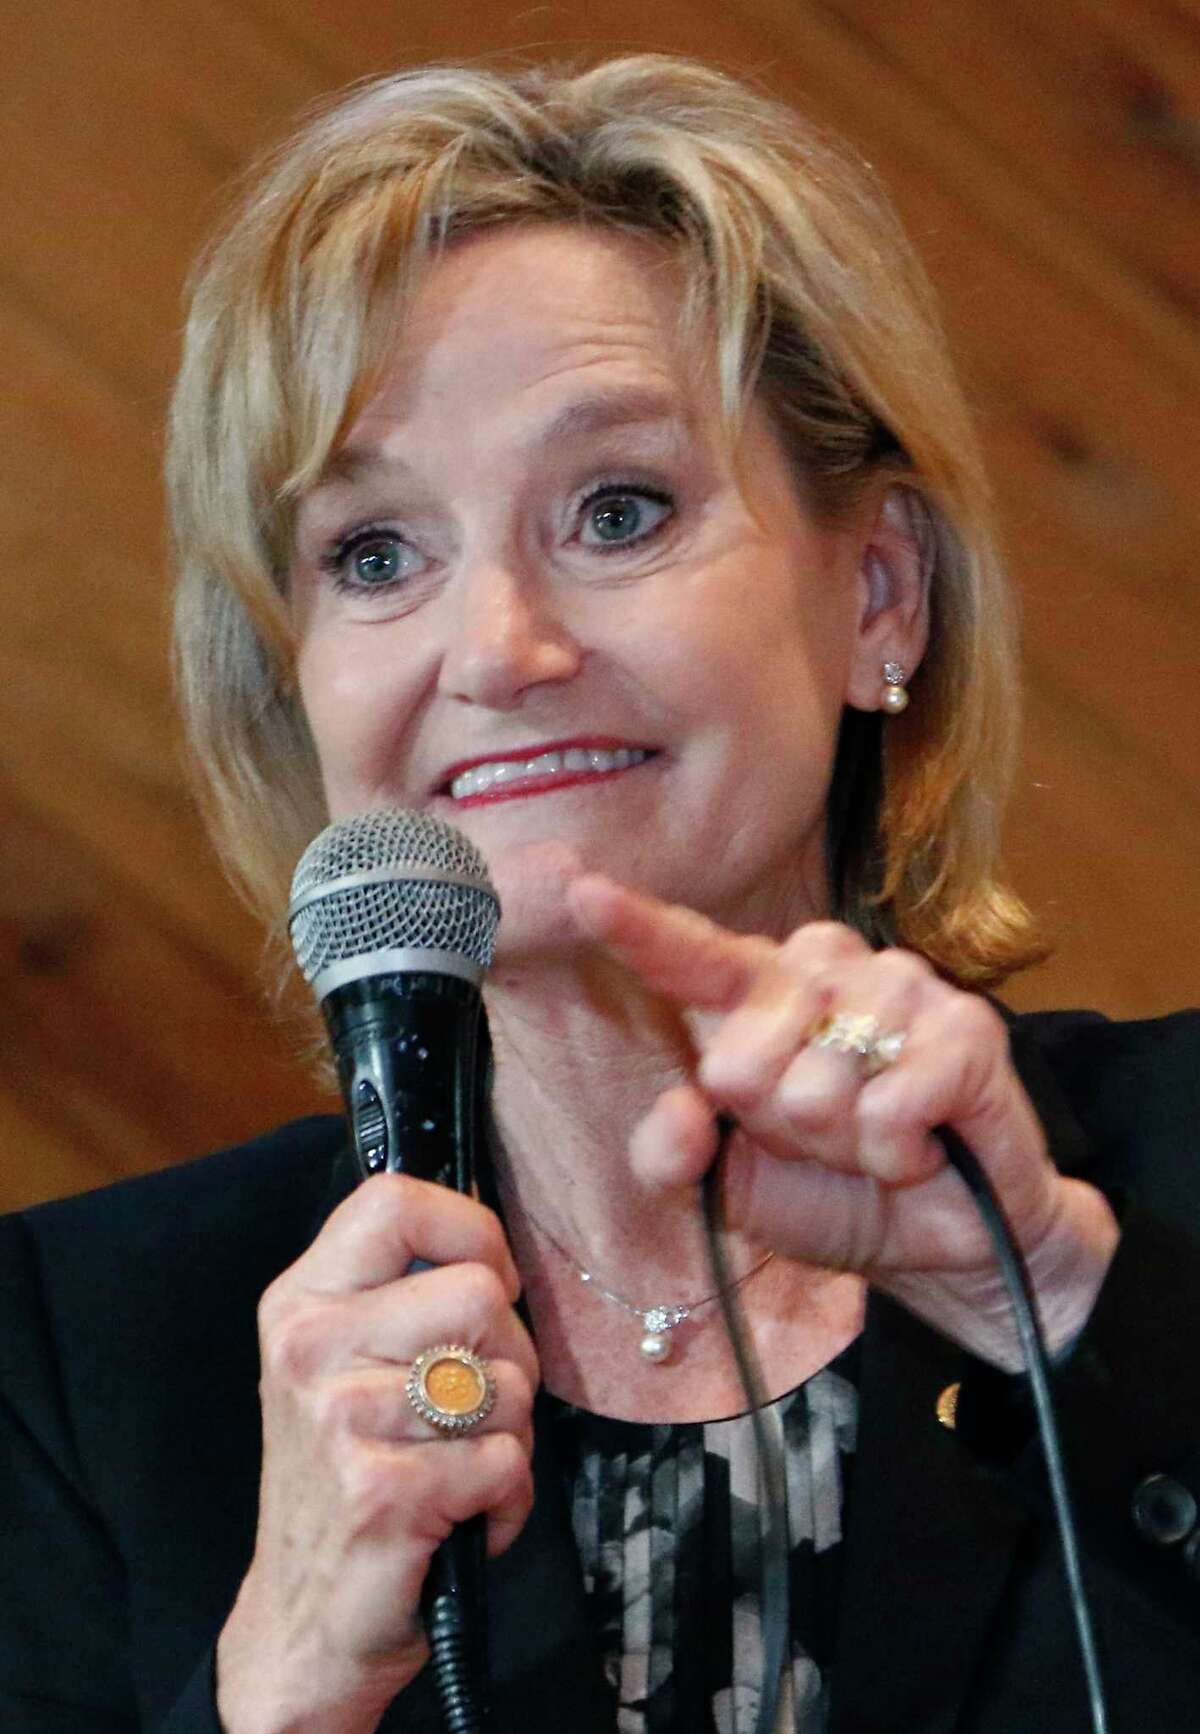 FILE - In this Nov. 5, 2018, file photo, U.S. Sen. Cindy Hyde-Smith, R-Miss., addresses a gathering of supporters in Jackson, Miss. The last U.S. Senate race of the midterms was coming to a close Tuesday as Mississippi residents chose between Hyde-Smith, a white Republican Senate appointee whose "public hanging" comments angered many people, and Mike Espy, a black Democrat who was agriculture secretary when Bill Clinton was in the White House.